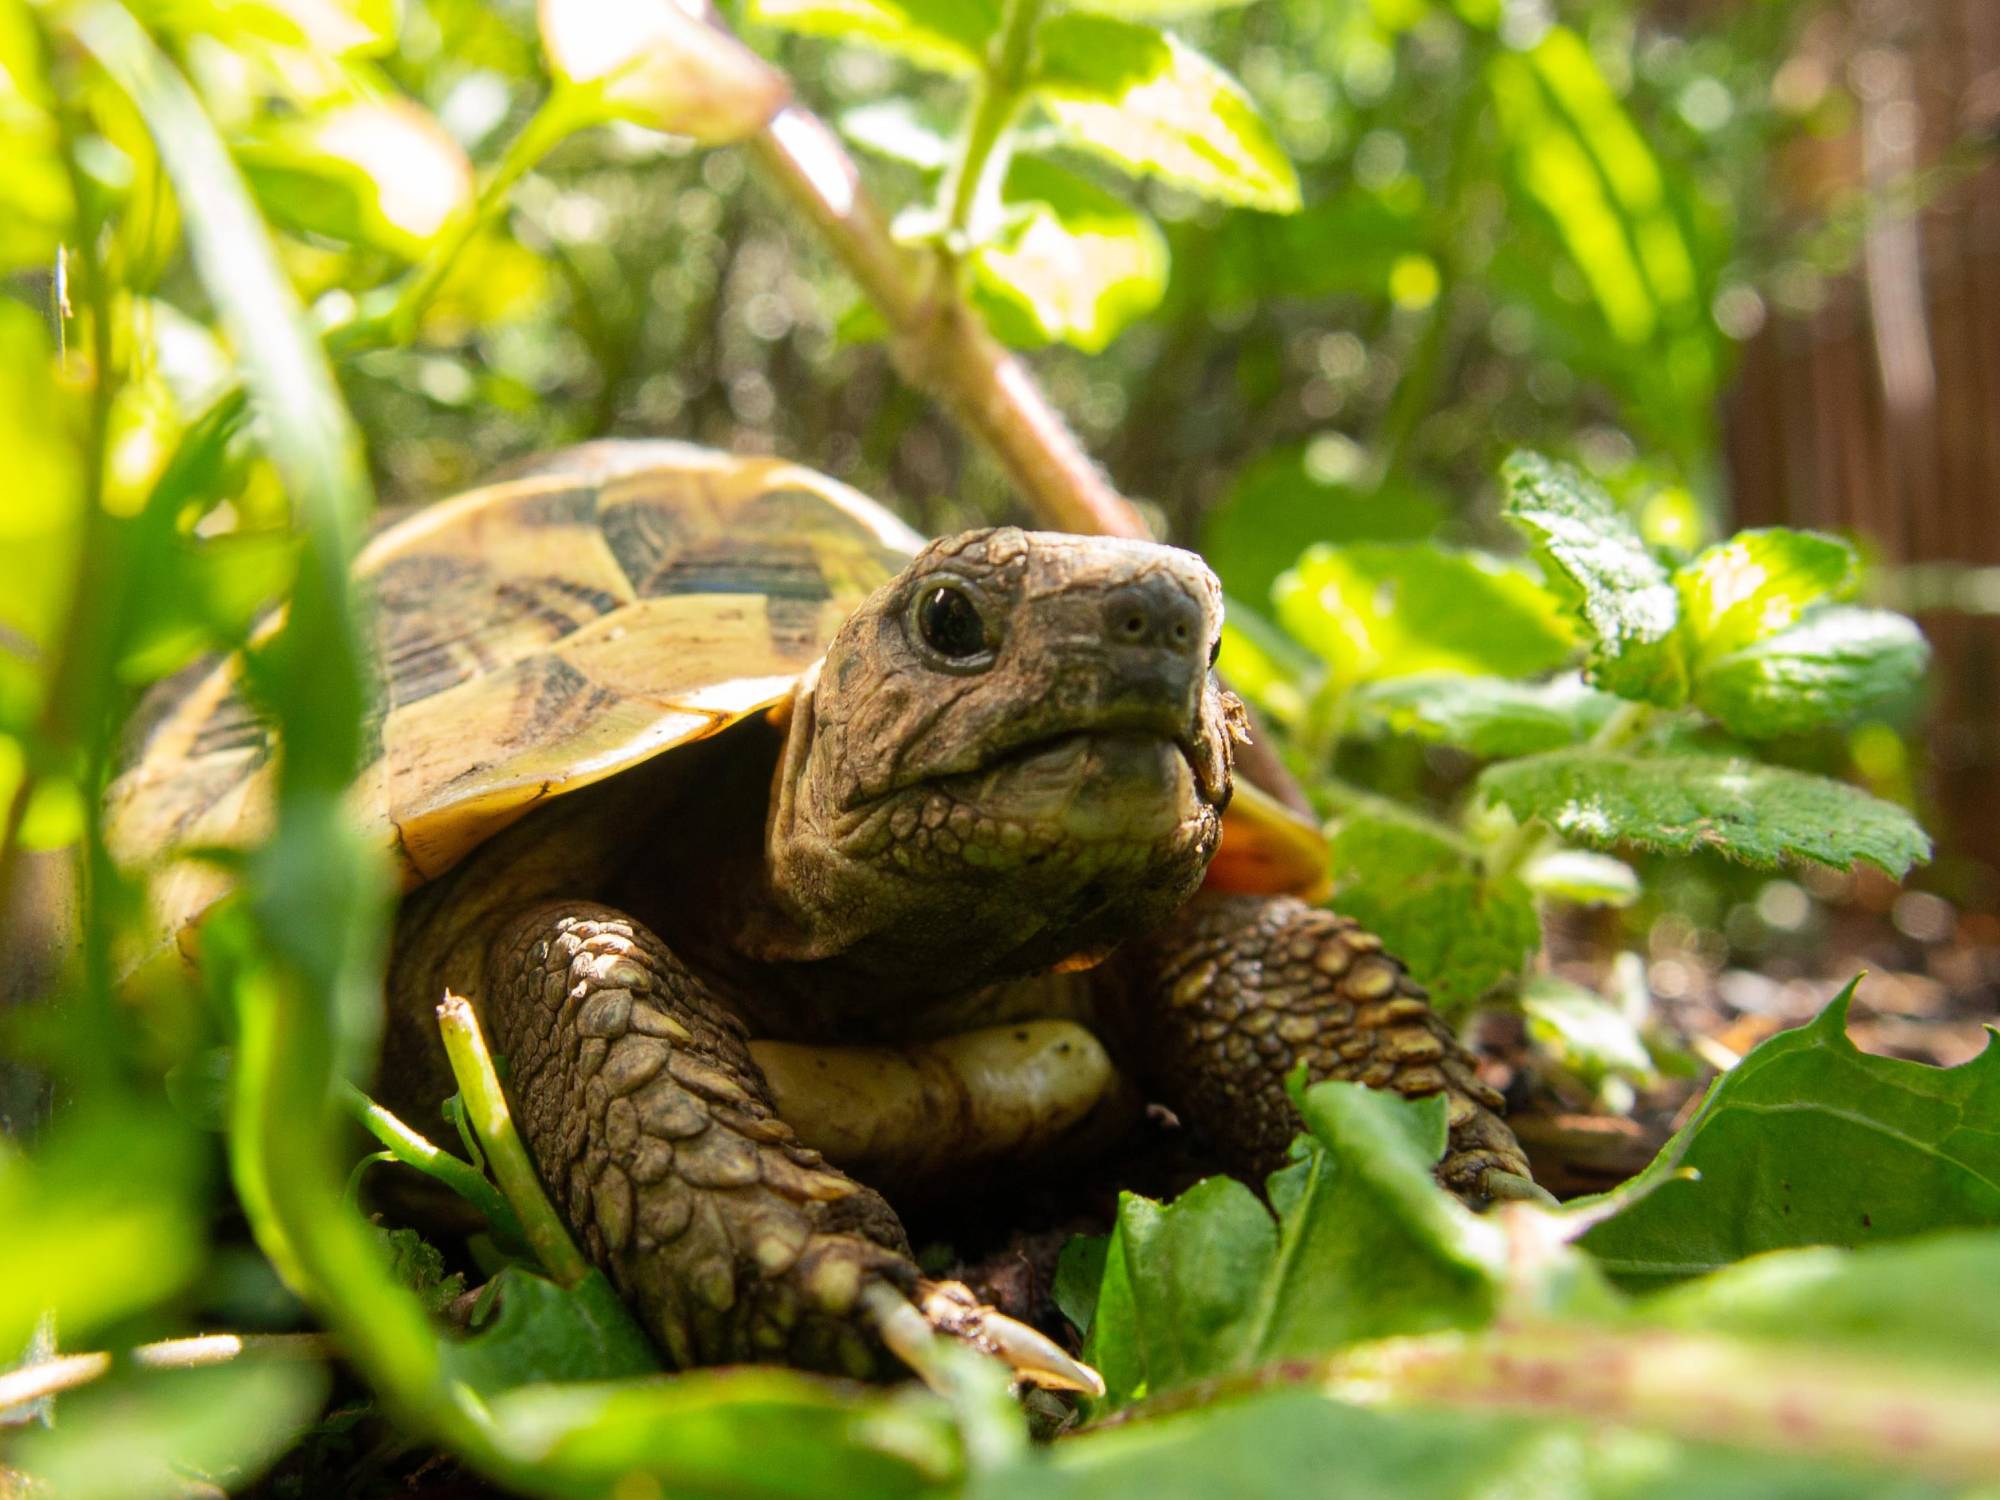 Tortoise on the ground surrounded by plants